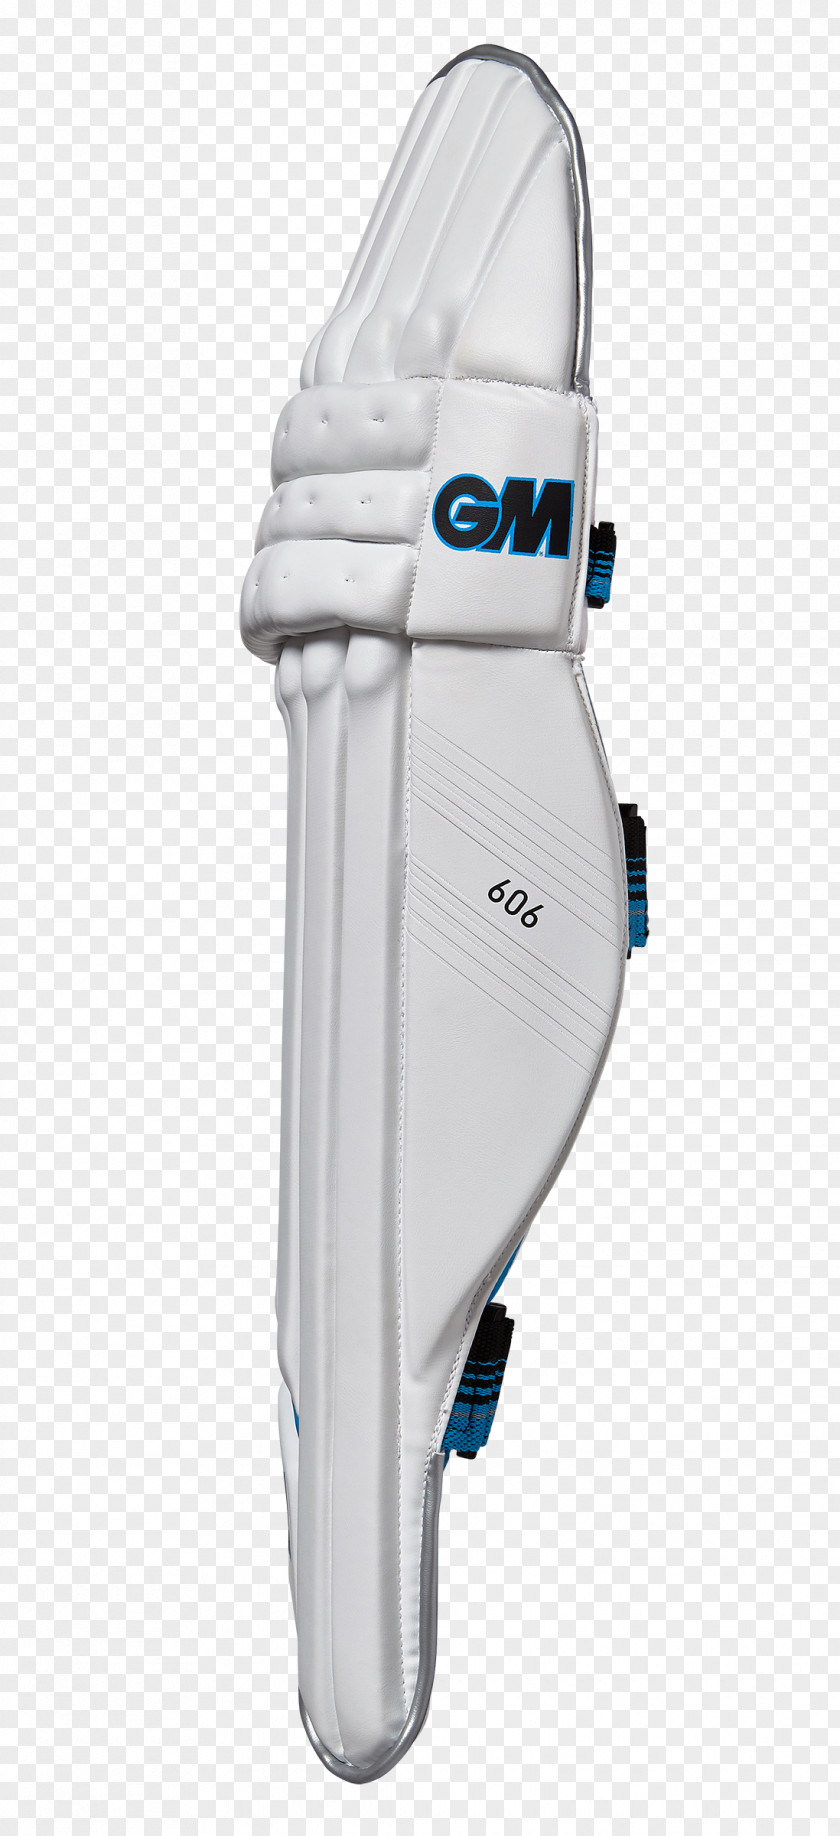 Protective Gear In Sports Pads Cricket General Motors Batting PNG